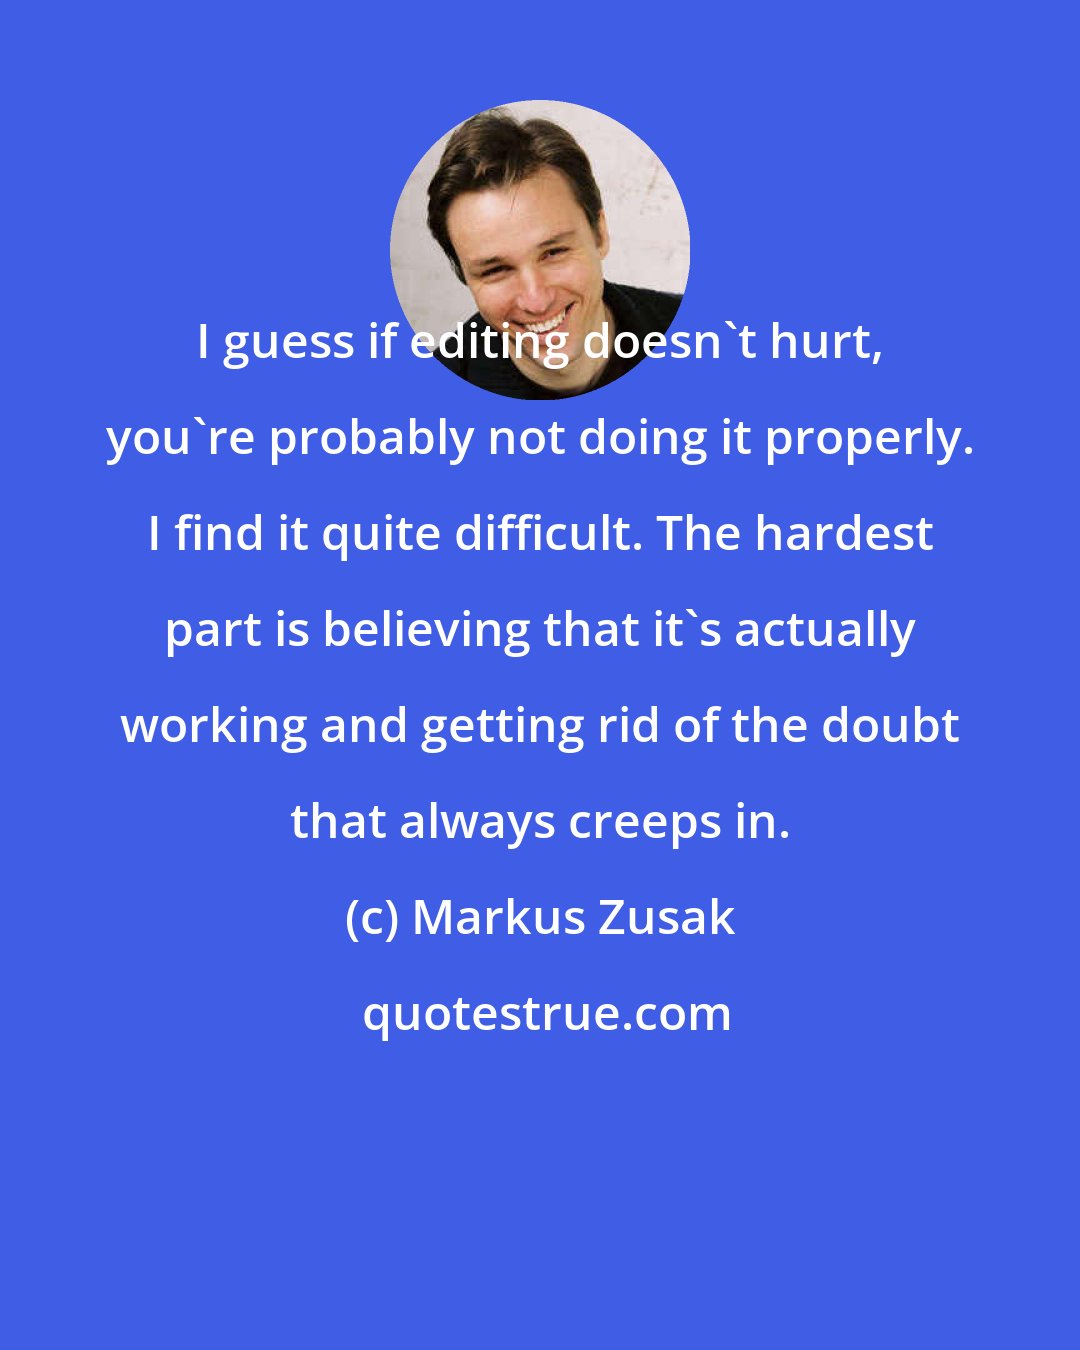 Markus Zusak: I guess if editing doesn't hurt, you're probably not doing it properly. I find it quite difficult. The hardest part is believing that it's actually working and getting rid of the doubt that always creeps in.